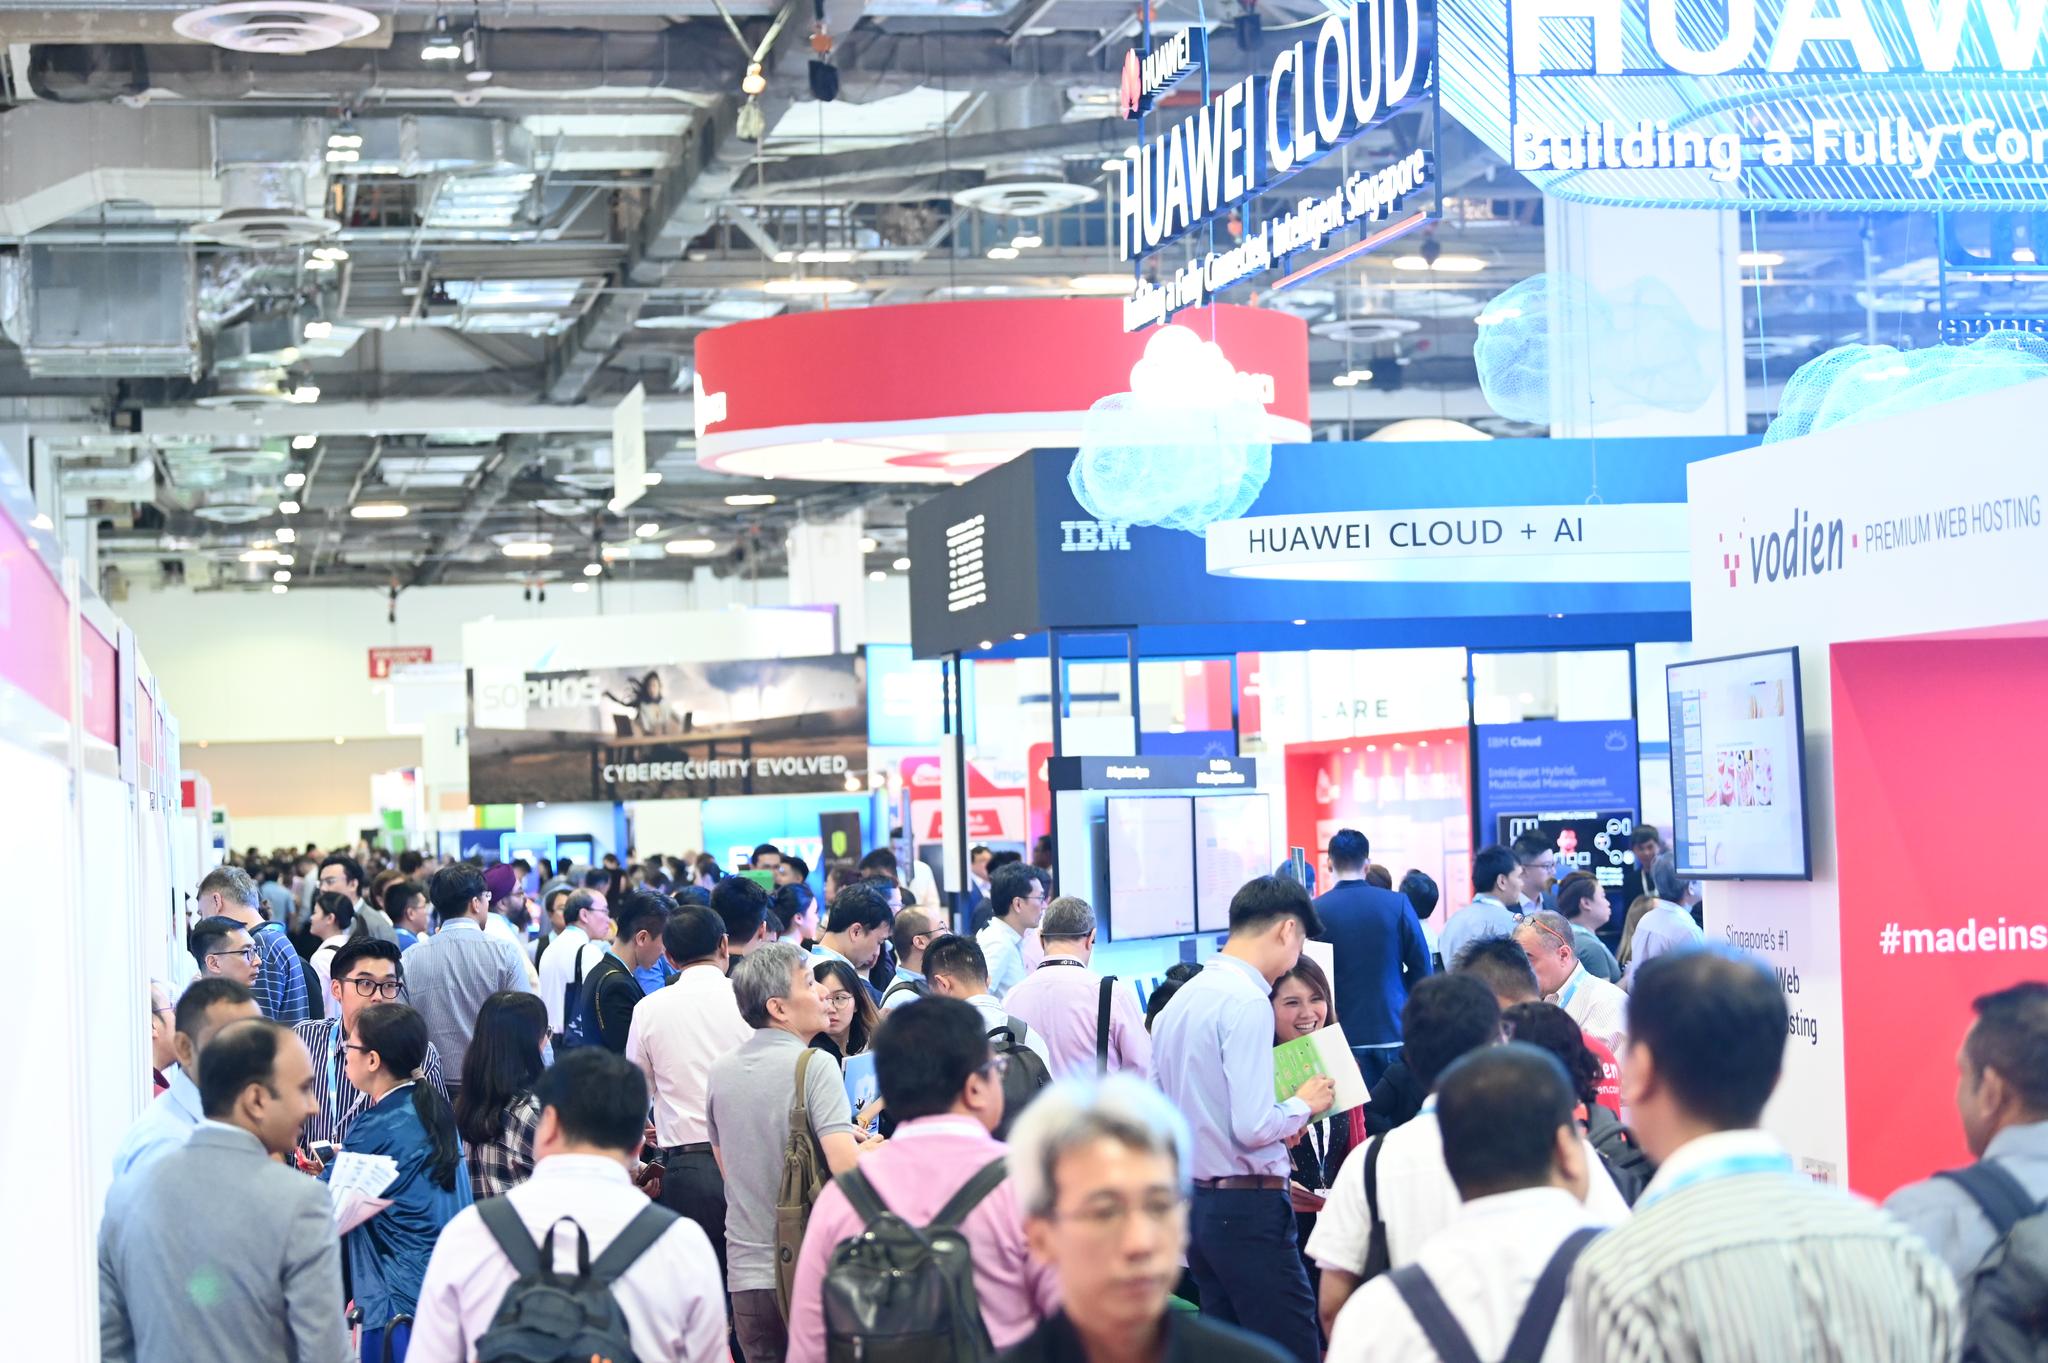 Cloud Expo Asia received over 21,000 attendees across two levels for its 7th edition